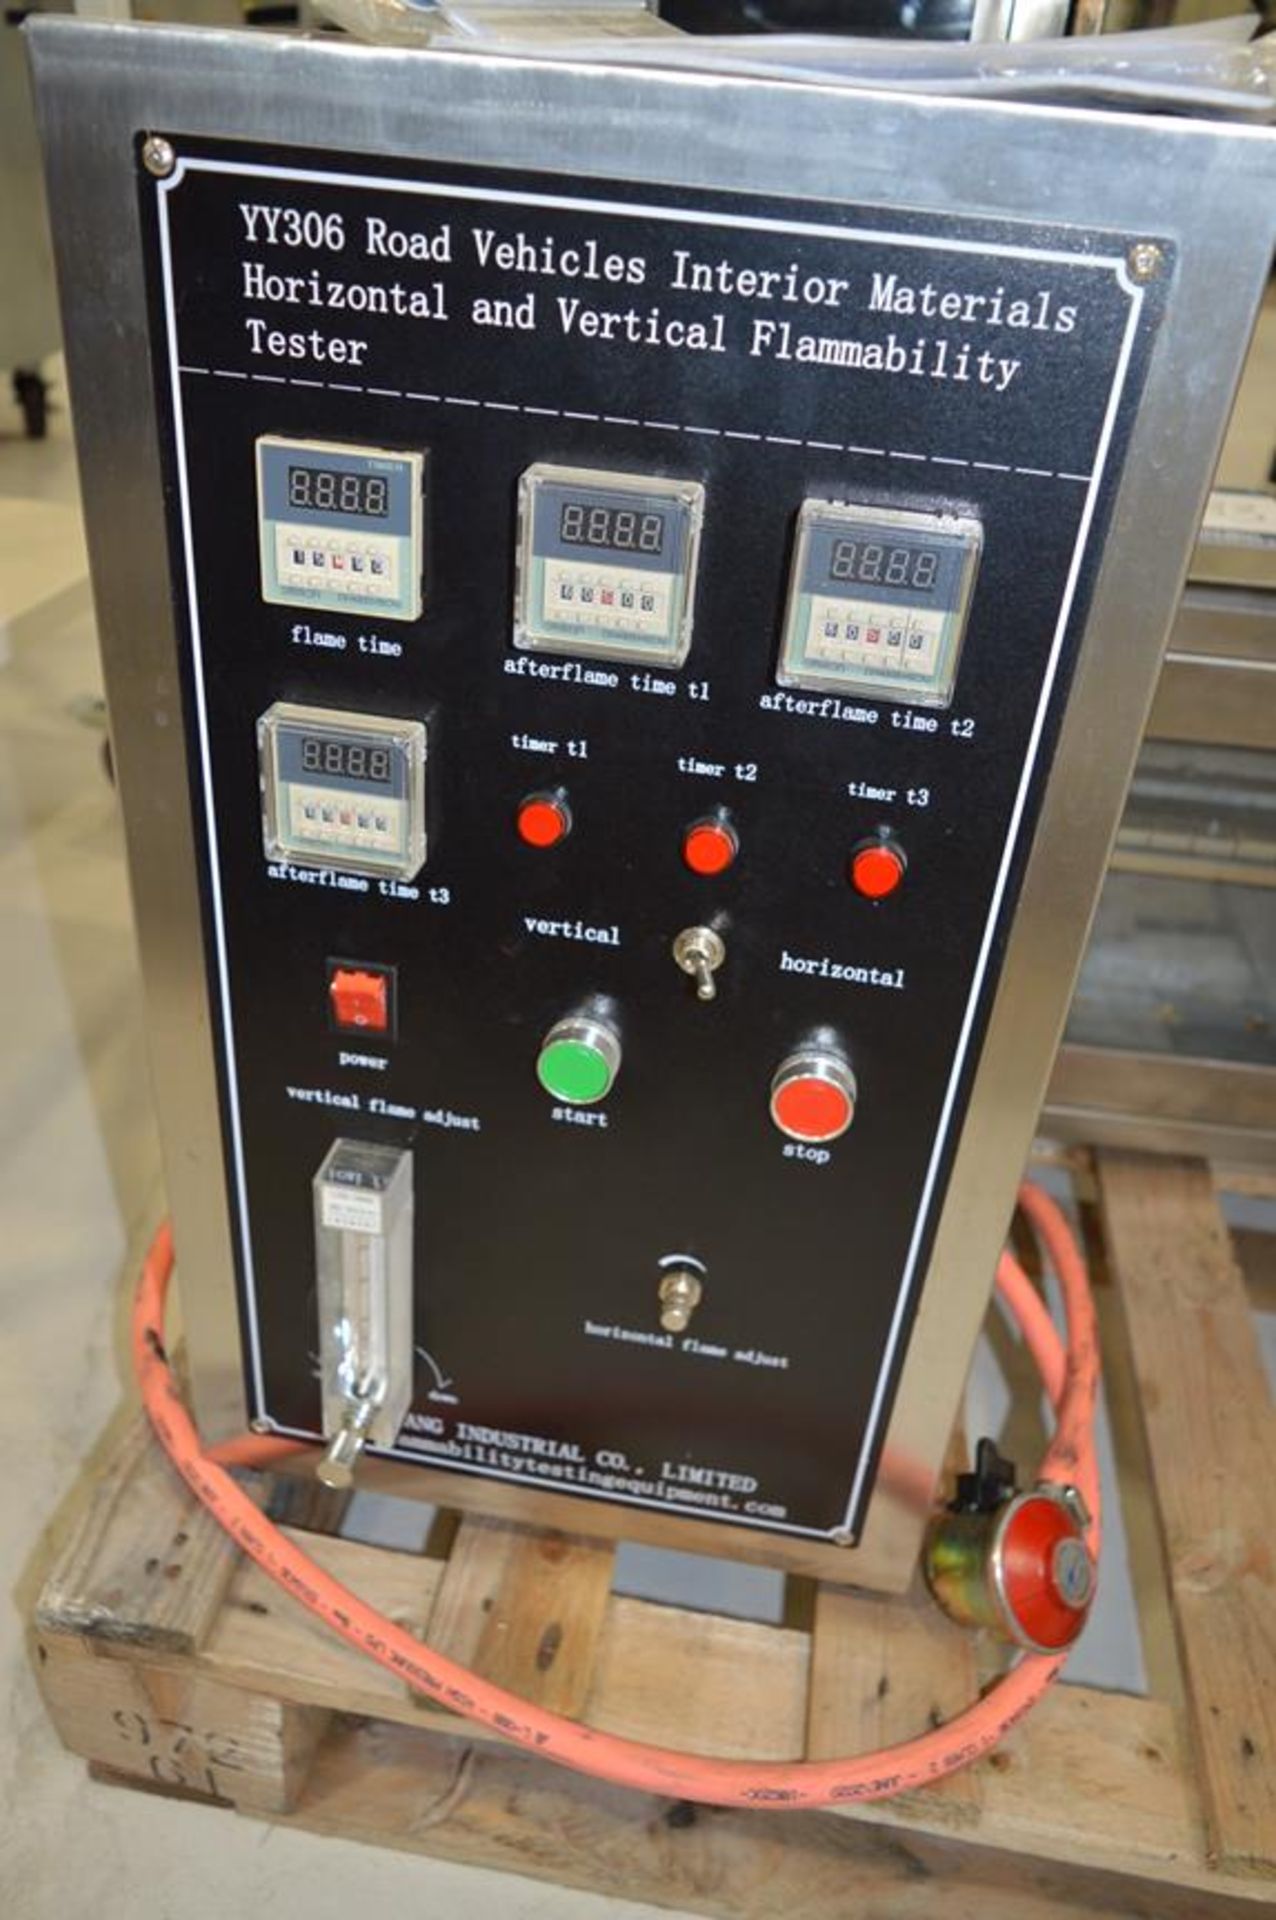 Stainless steel test cabinet with YY306 vehicle material test controller - Image 4 of 6